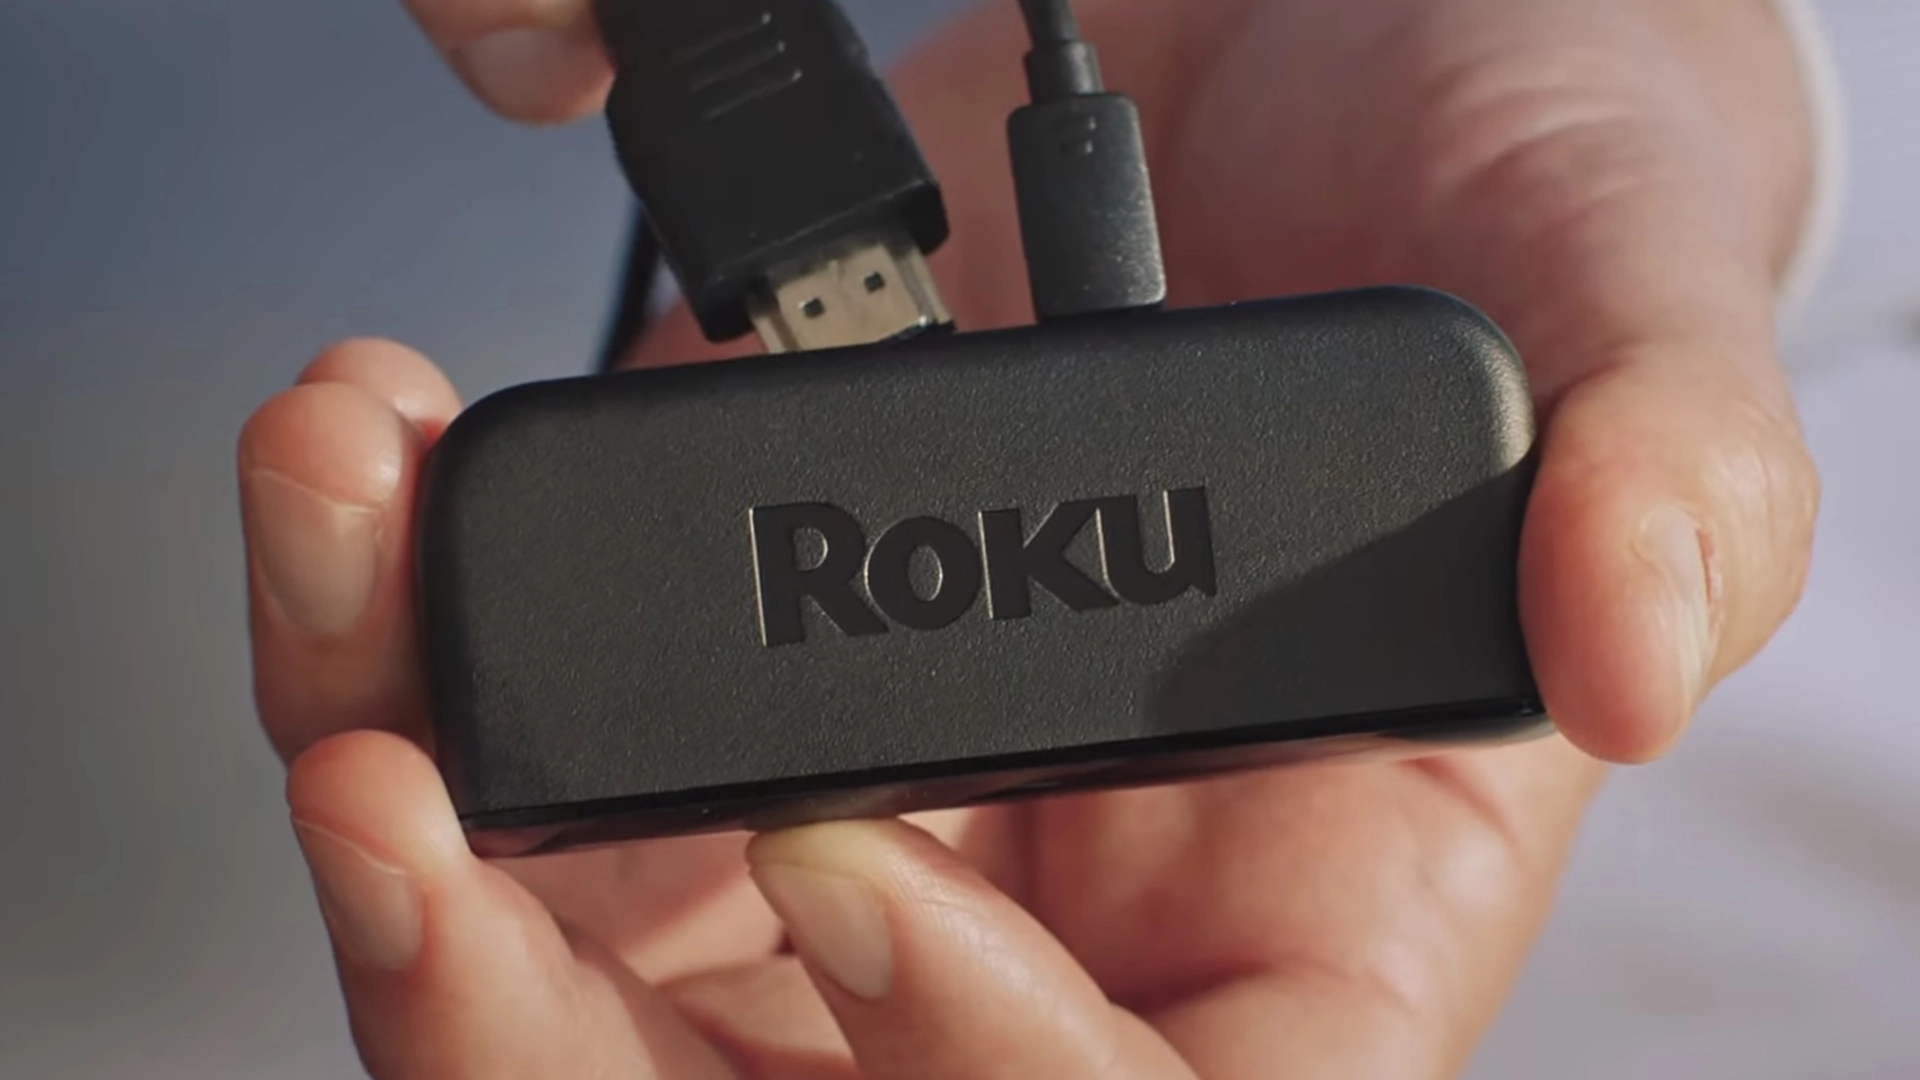 Roku Won’t Connect to WiFi (How to Fix it)